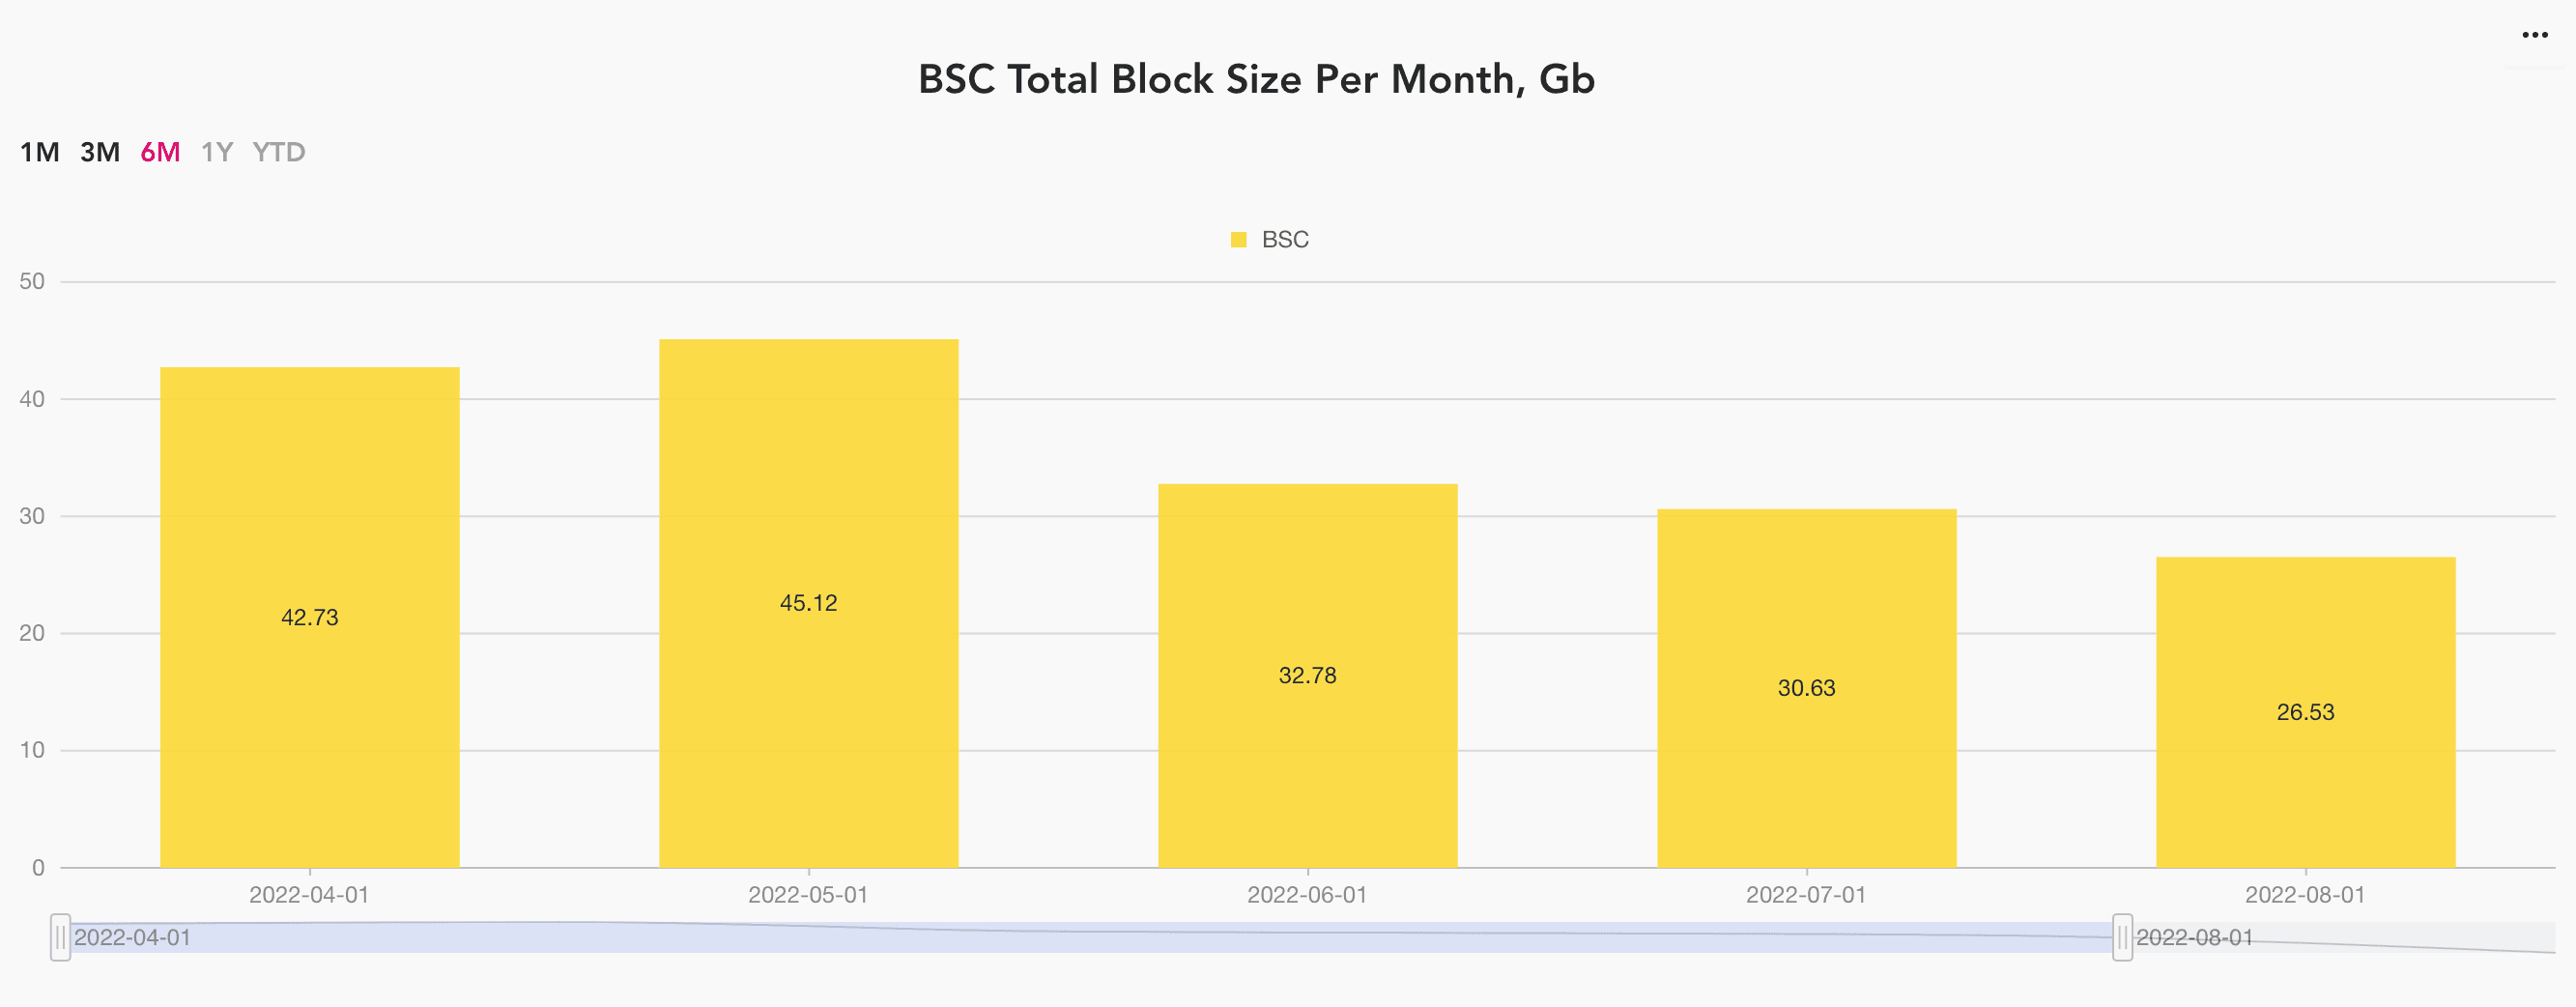 BSC total block size per month